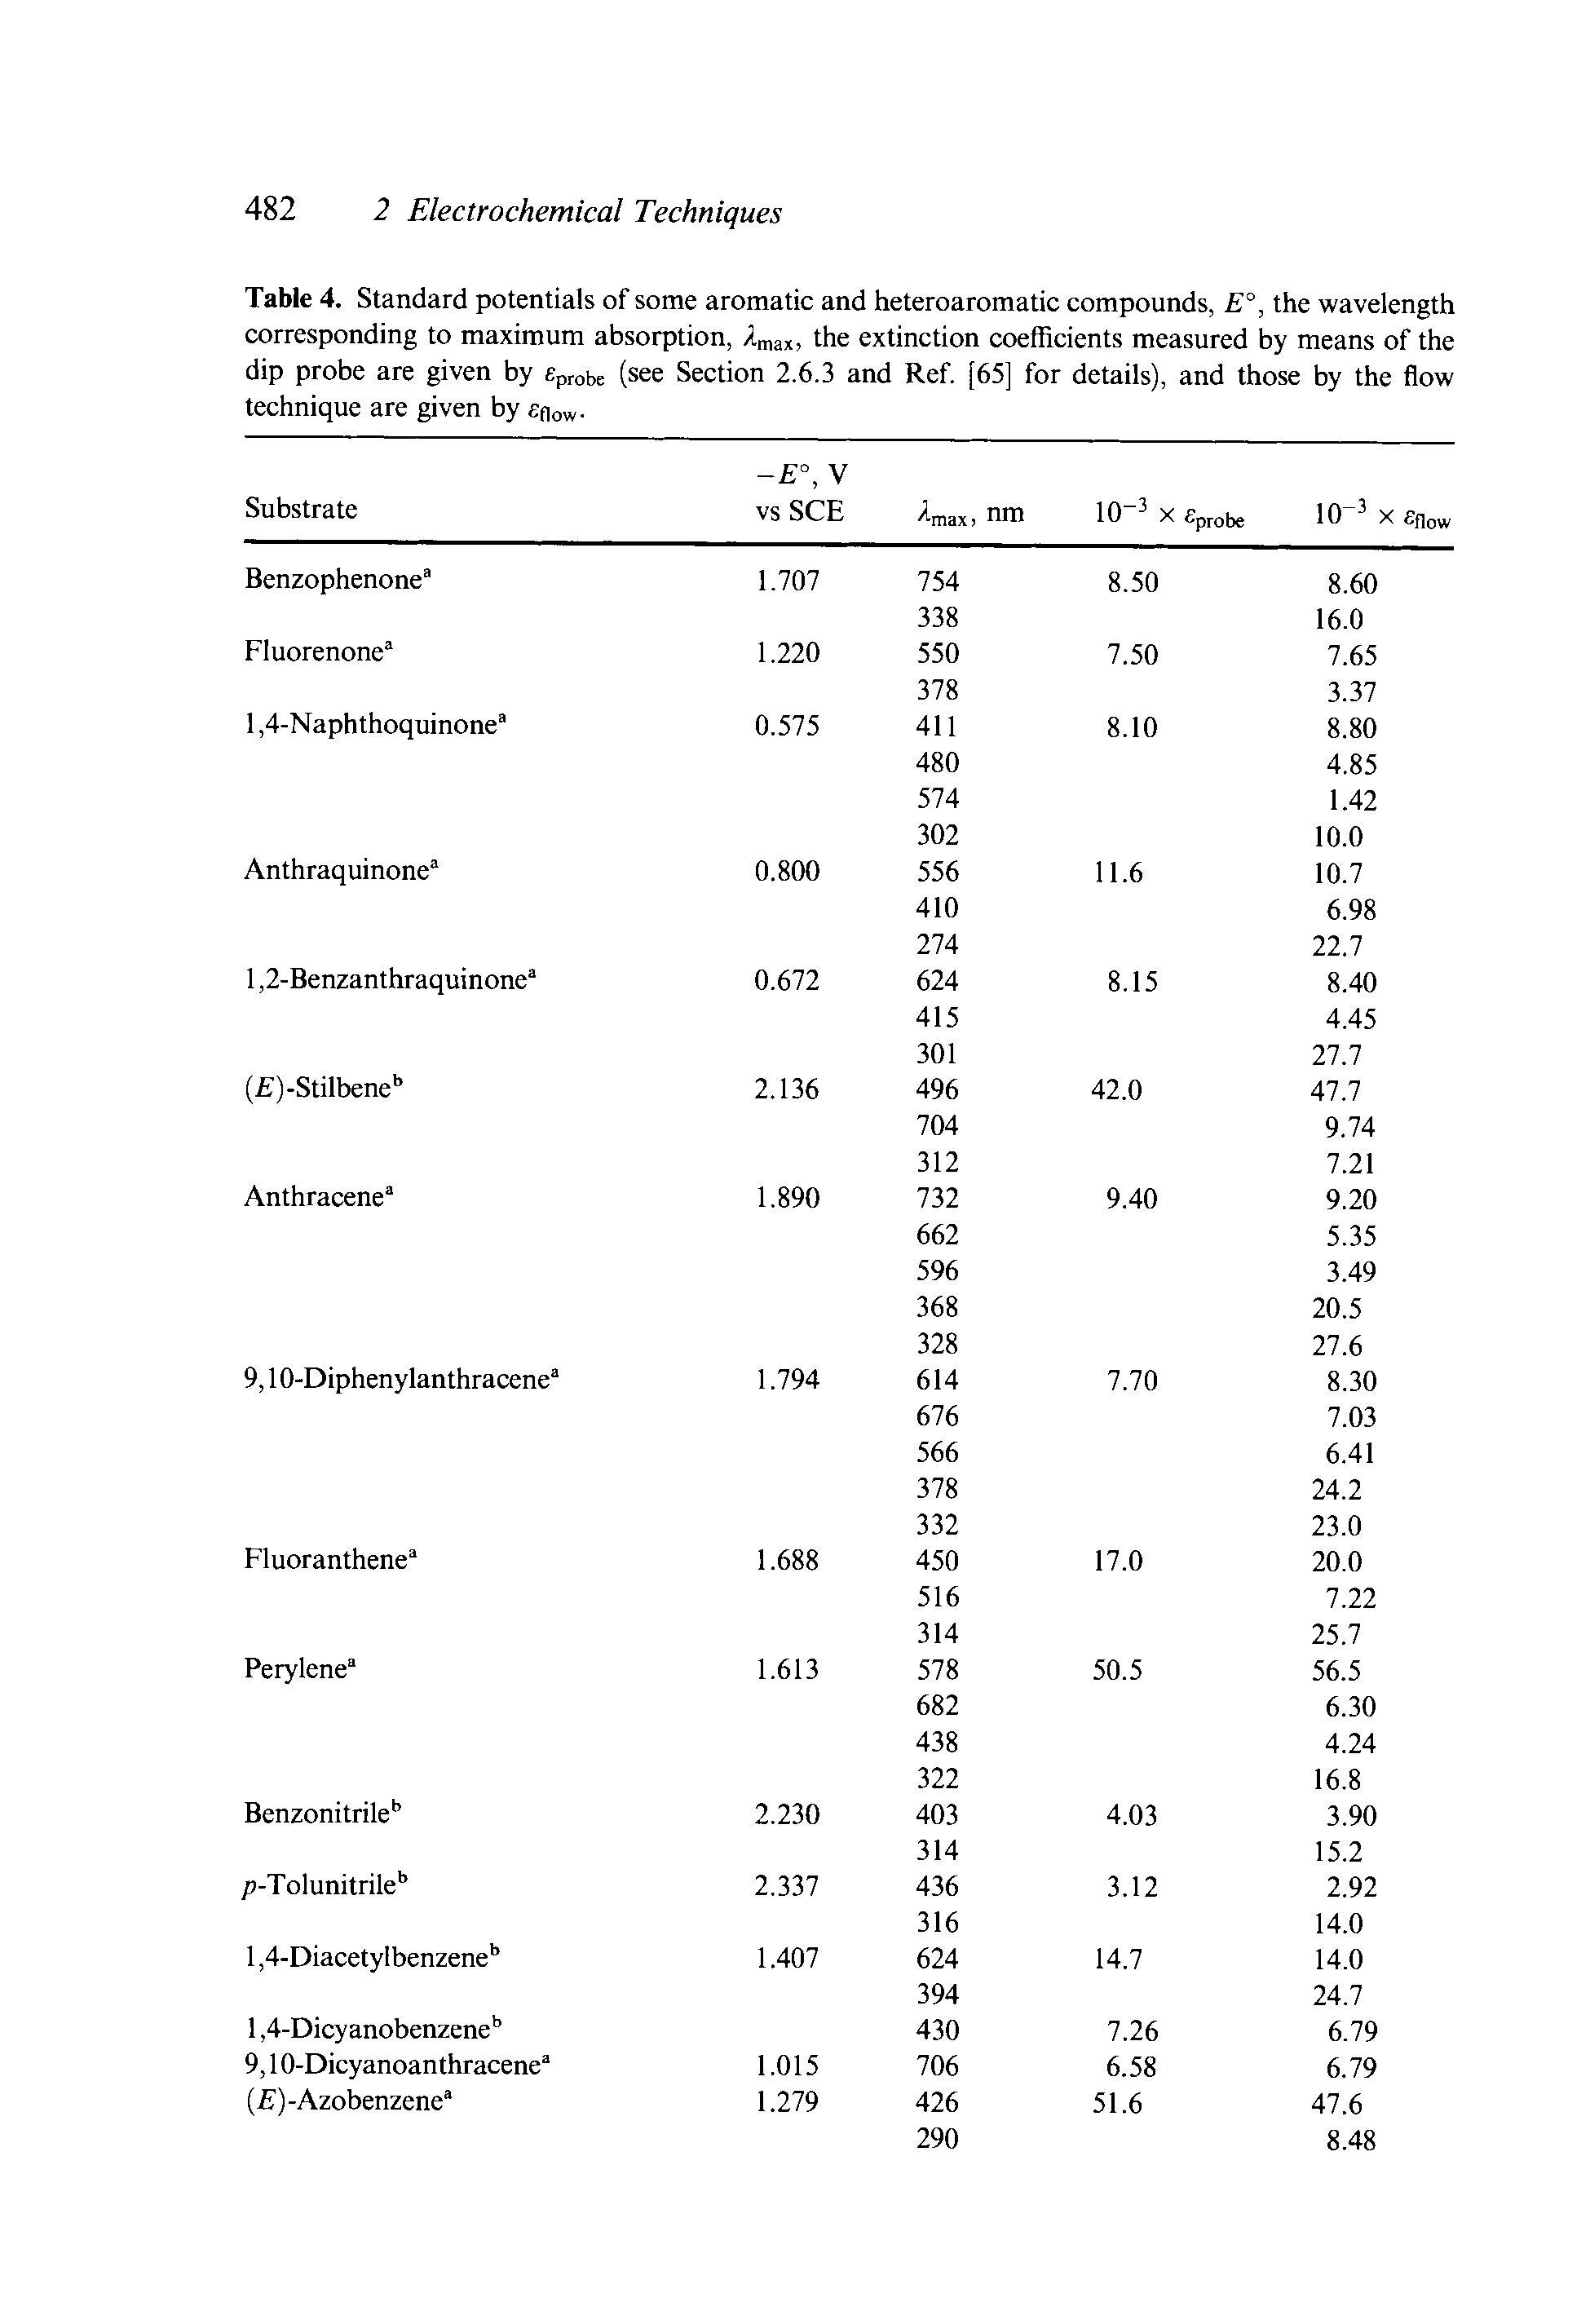 Table 4. Standard potentials of some aromatic and heteroaromatic compounds, E°, the wavelength corresponding to maximum absorption, -imax, the extinction coefficients measured by means of the dip probe are given by fiprobe (see Section 2.6.3 and Ref [65] for details), and those by the flow technique are given by enow...